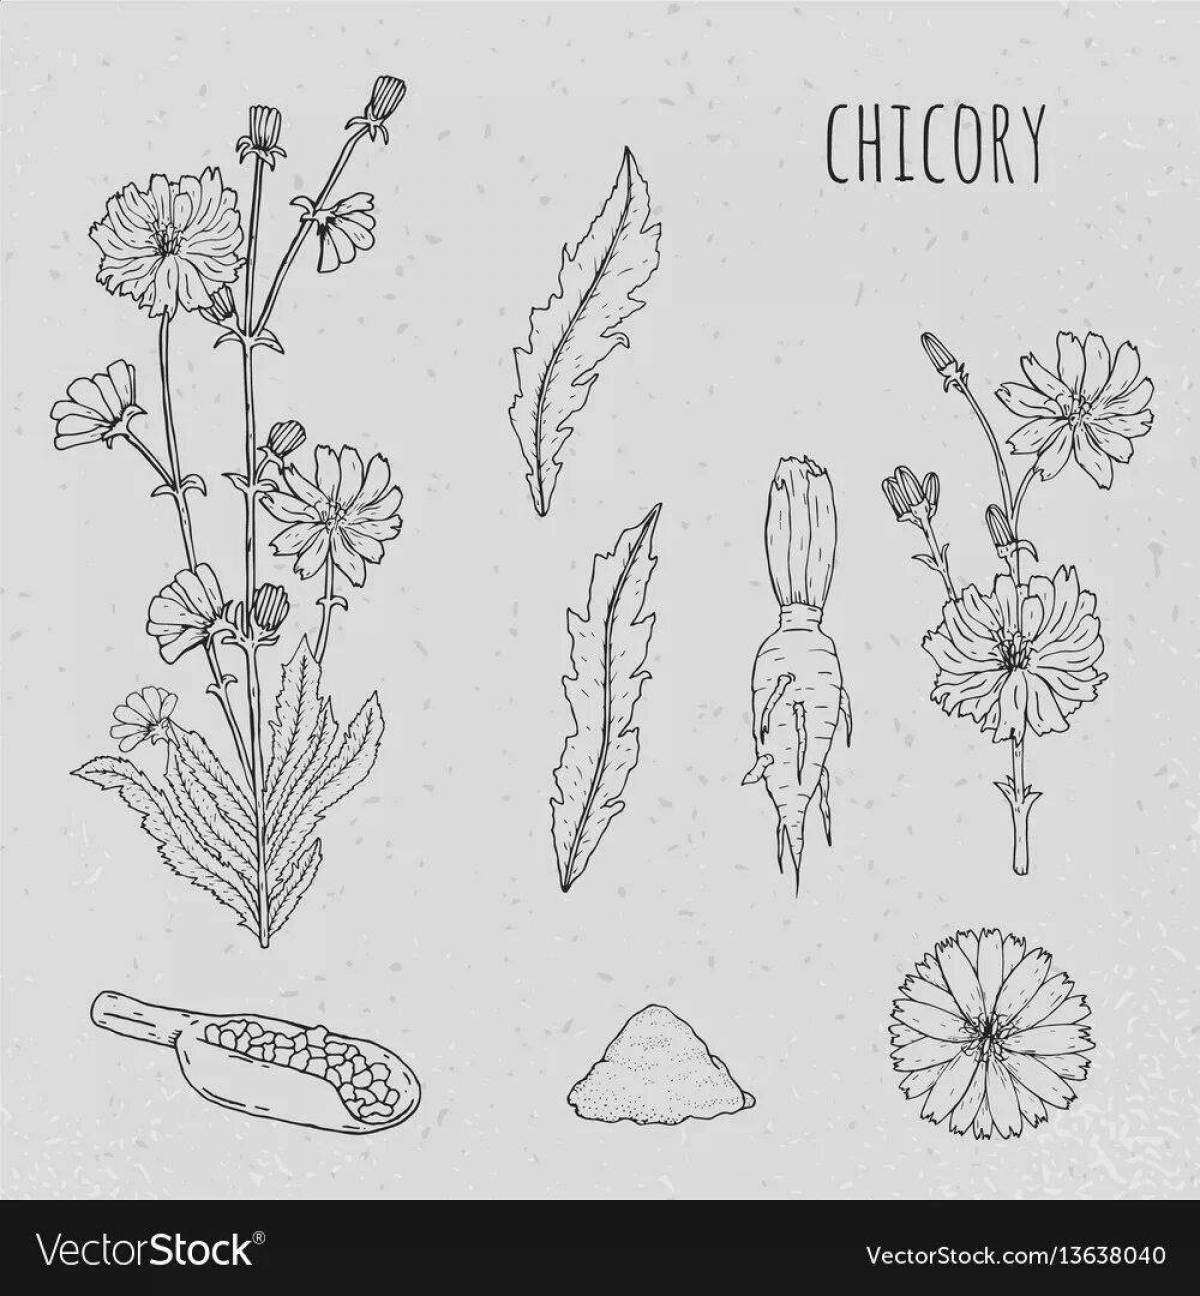 Exciting chicory coloring page